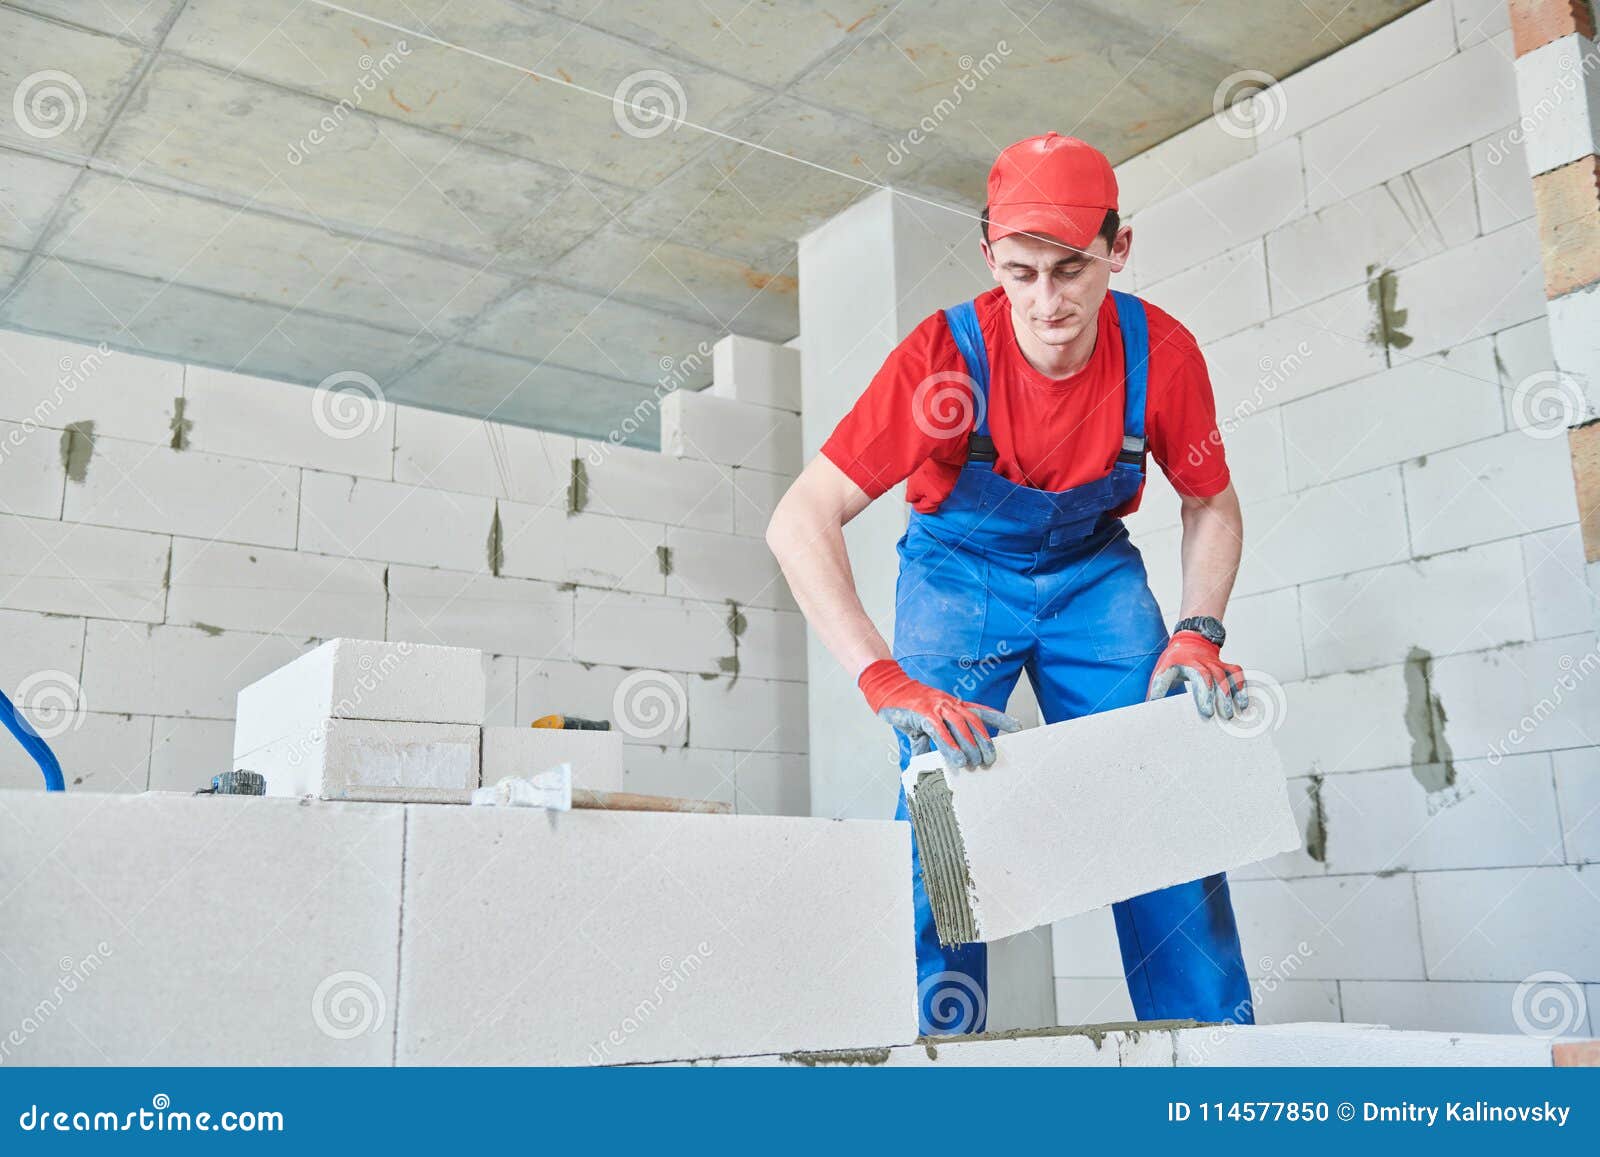 Bricklayer Builder Working With Autoclaved Aerated Concrete Blocks